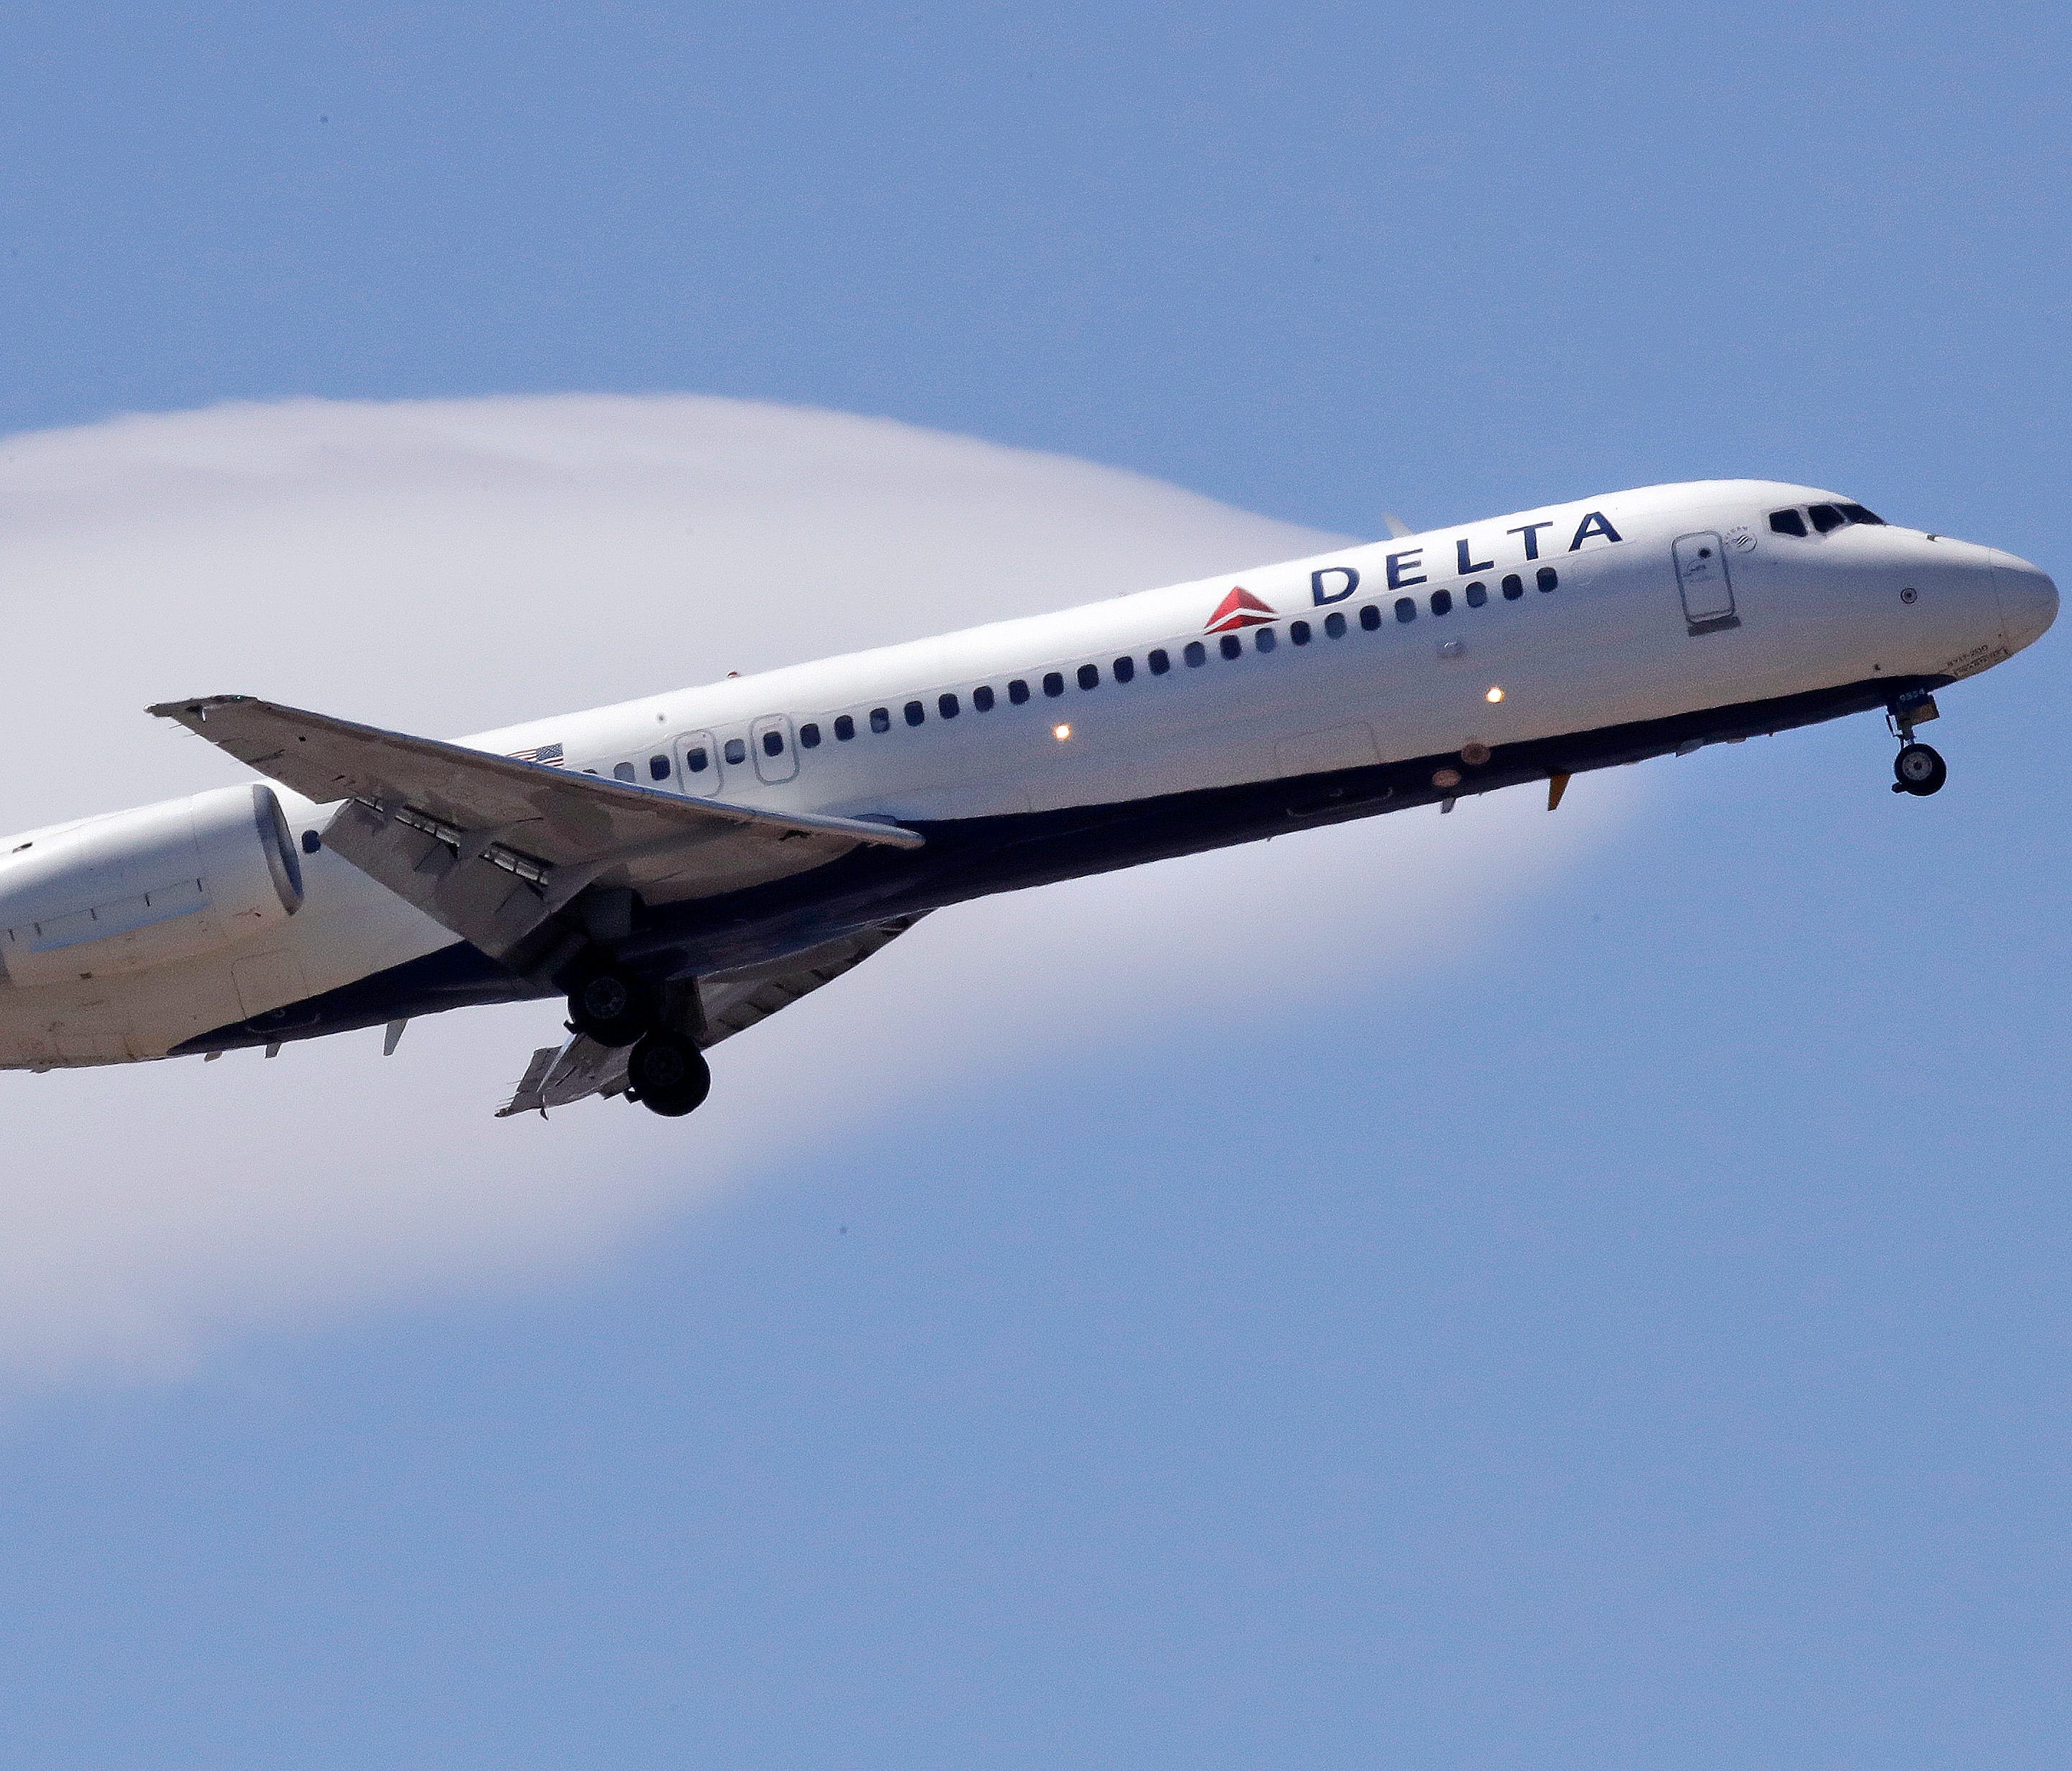 A Delta Air Lines passenger jet plane, a Boeing 717-200 model, approaches Logan Airport in Boston on May 24, 2018.